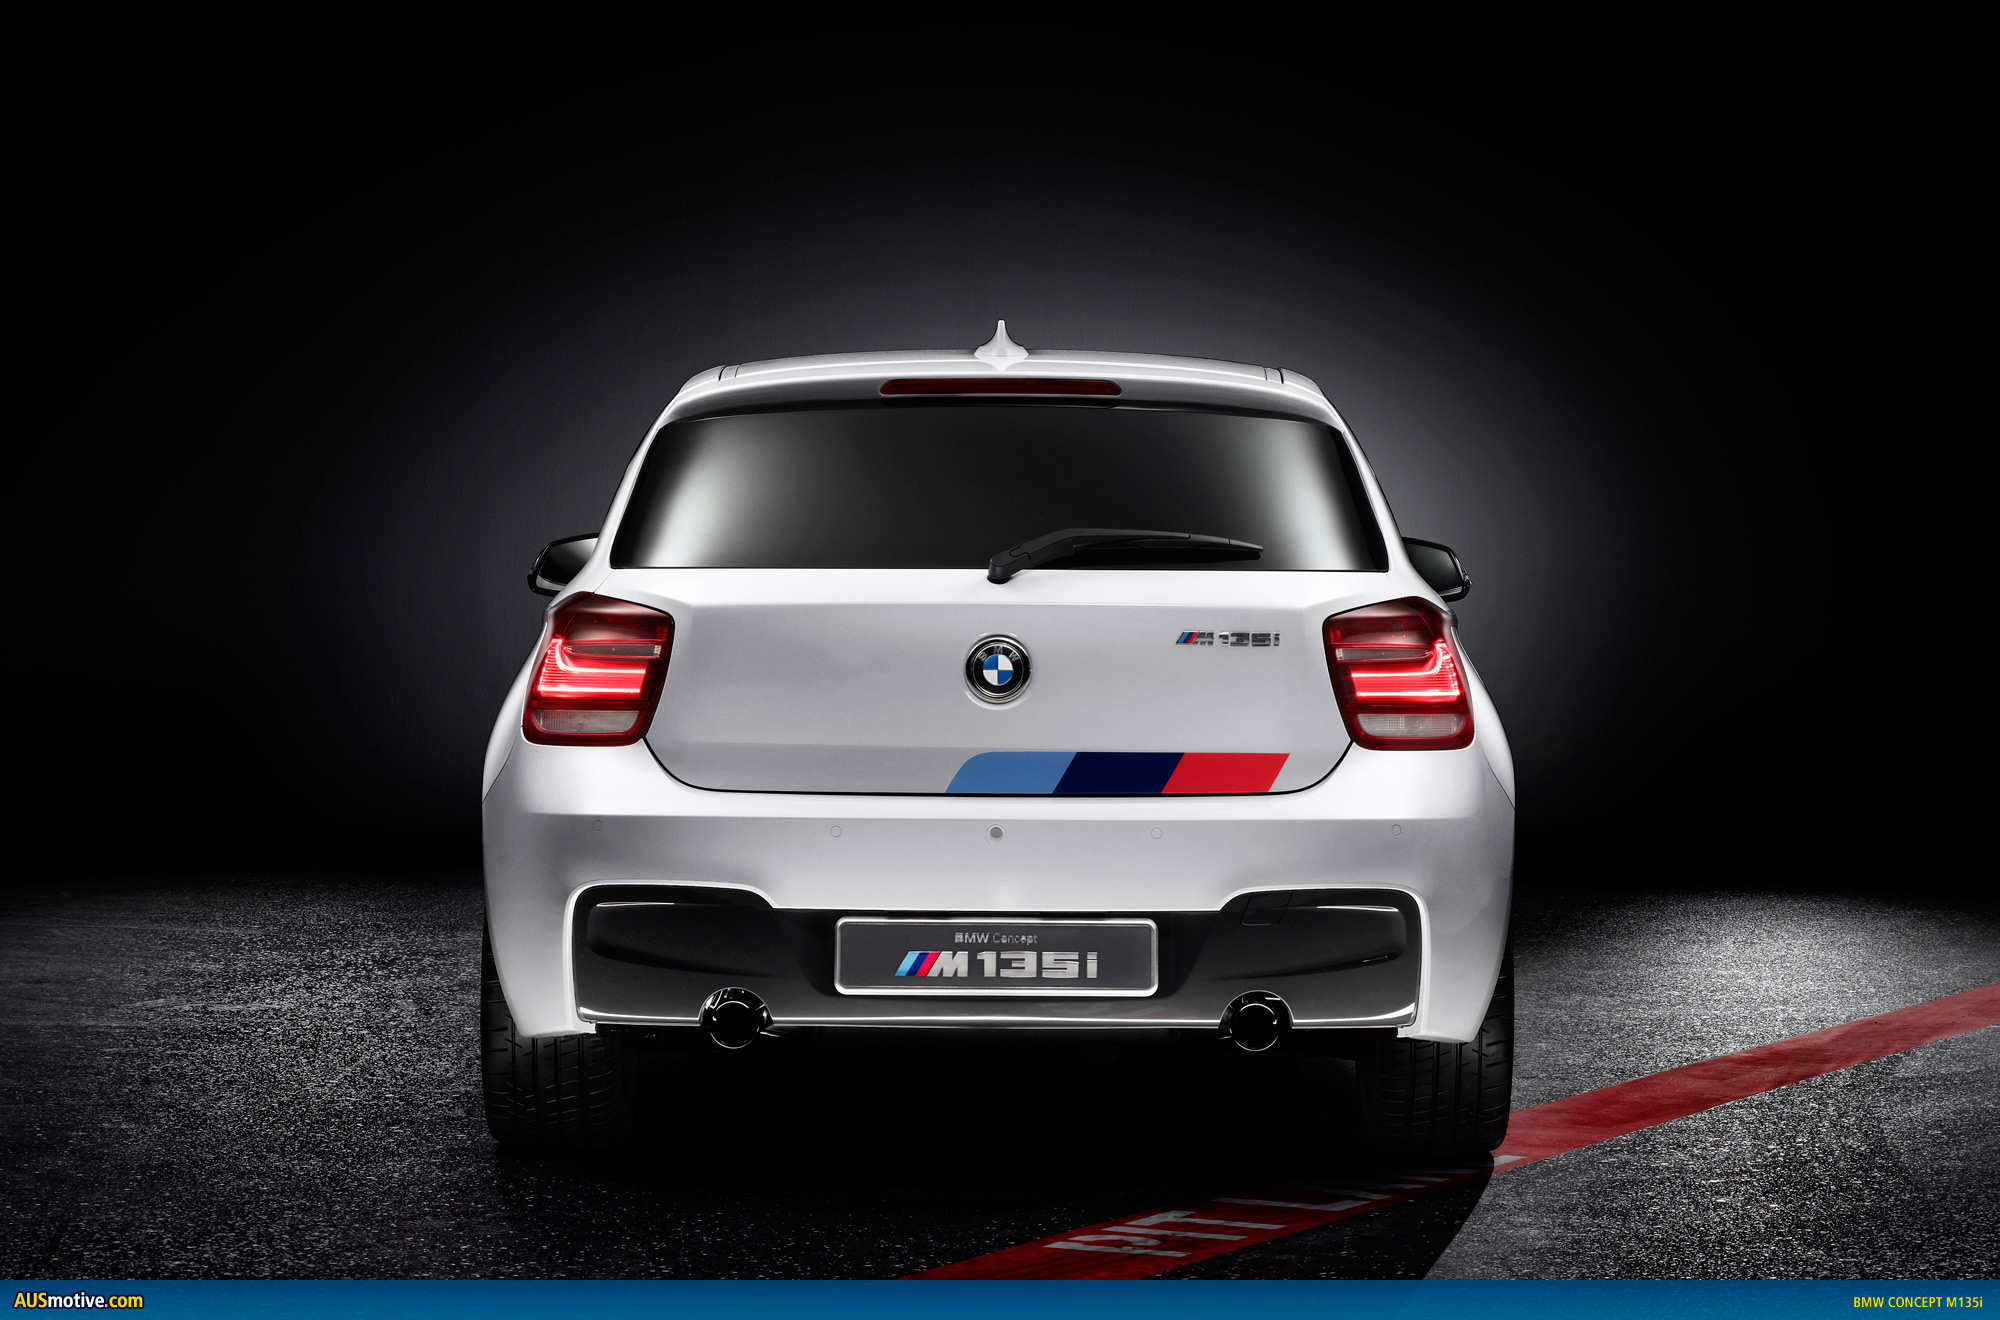 The Ultimate Driving Machine: The BMW M135i Concept